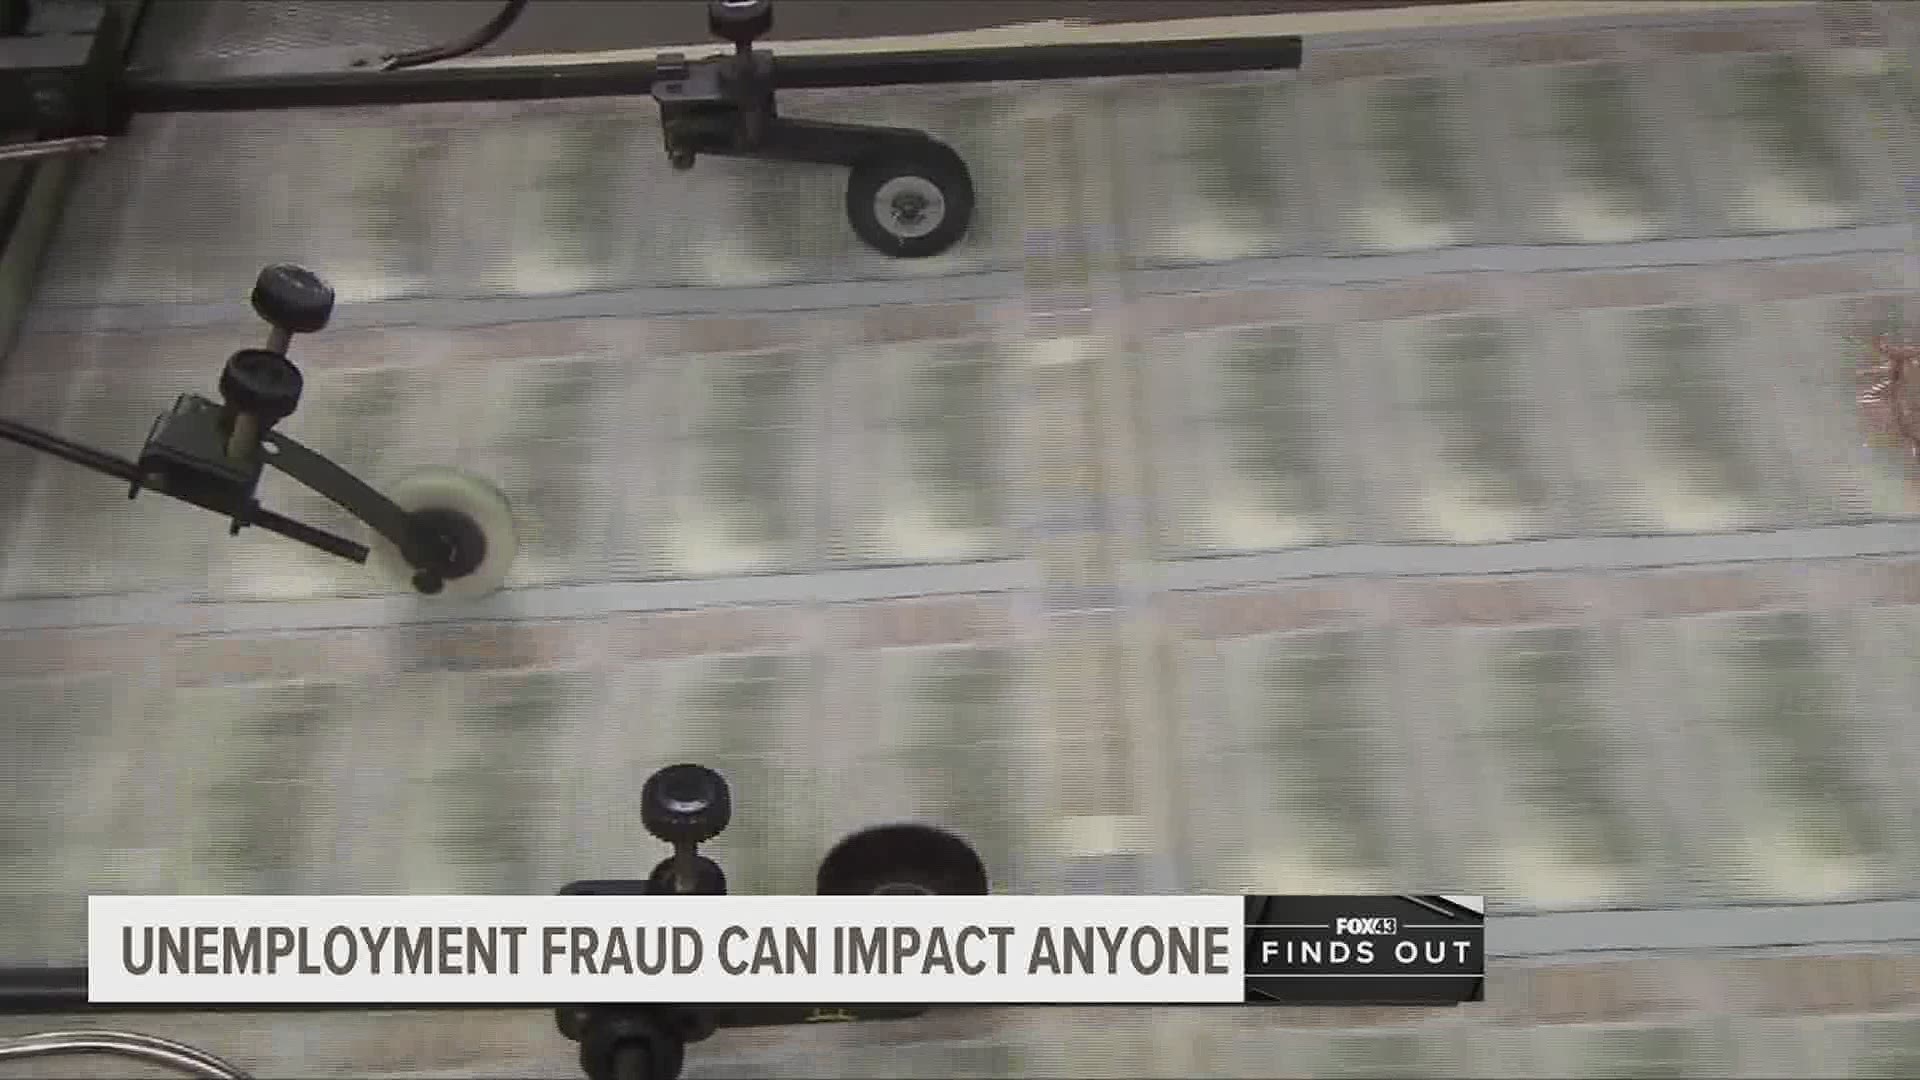 FOX43 Finds Out how the normal protections, like credit freezes and fraud watches, may not protect you from unemployment fraud.